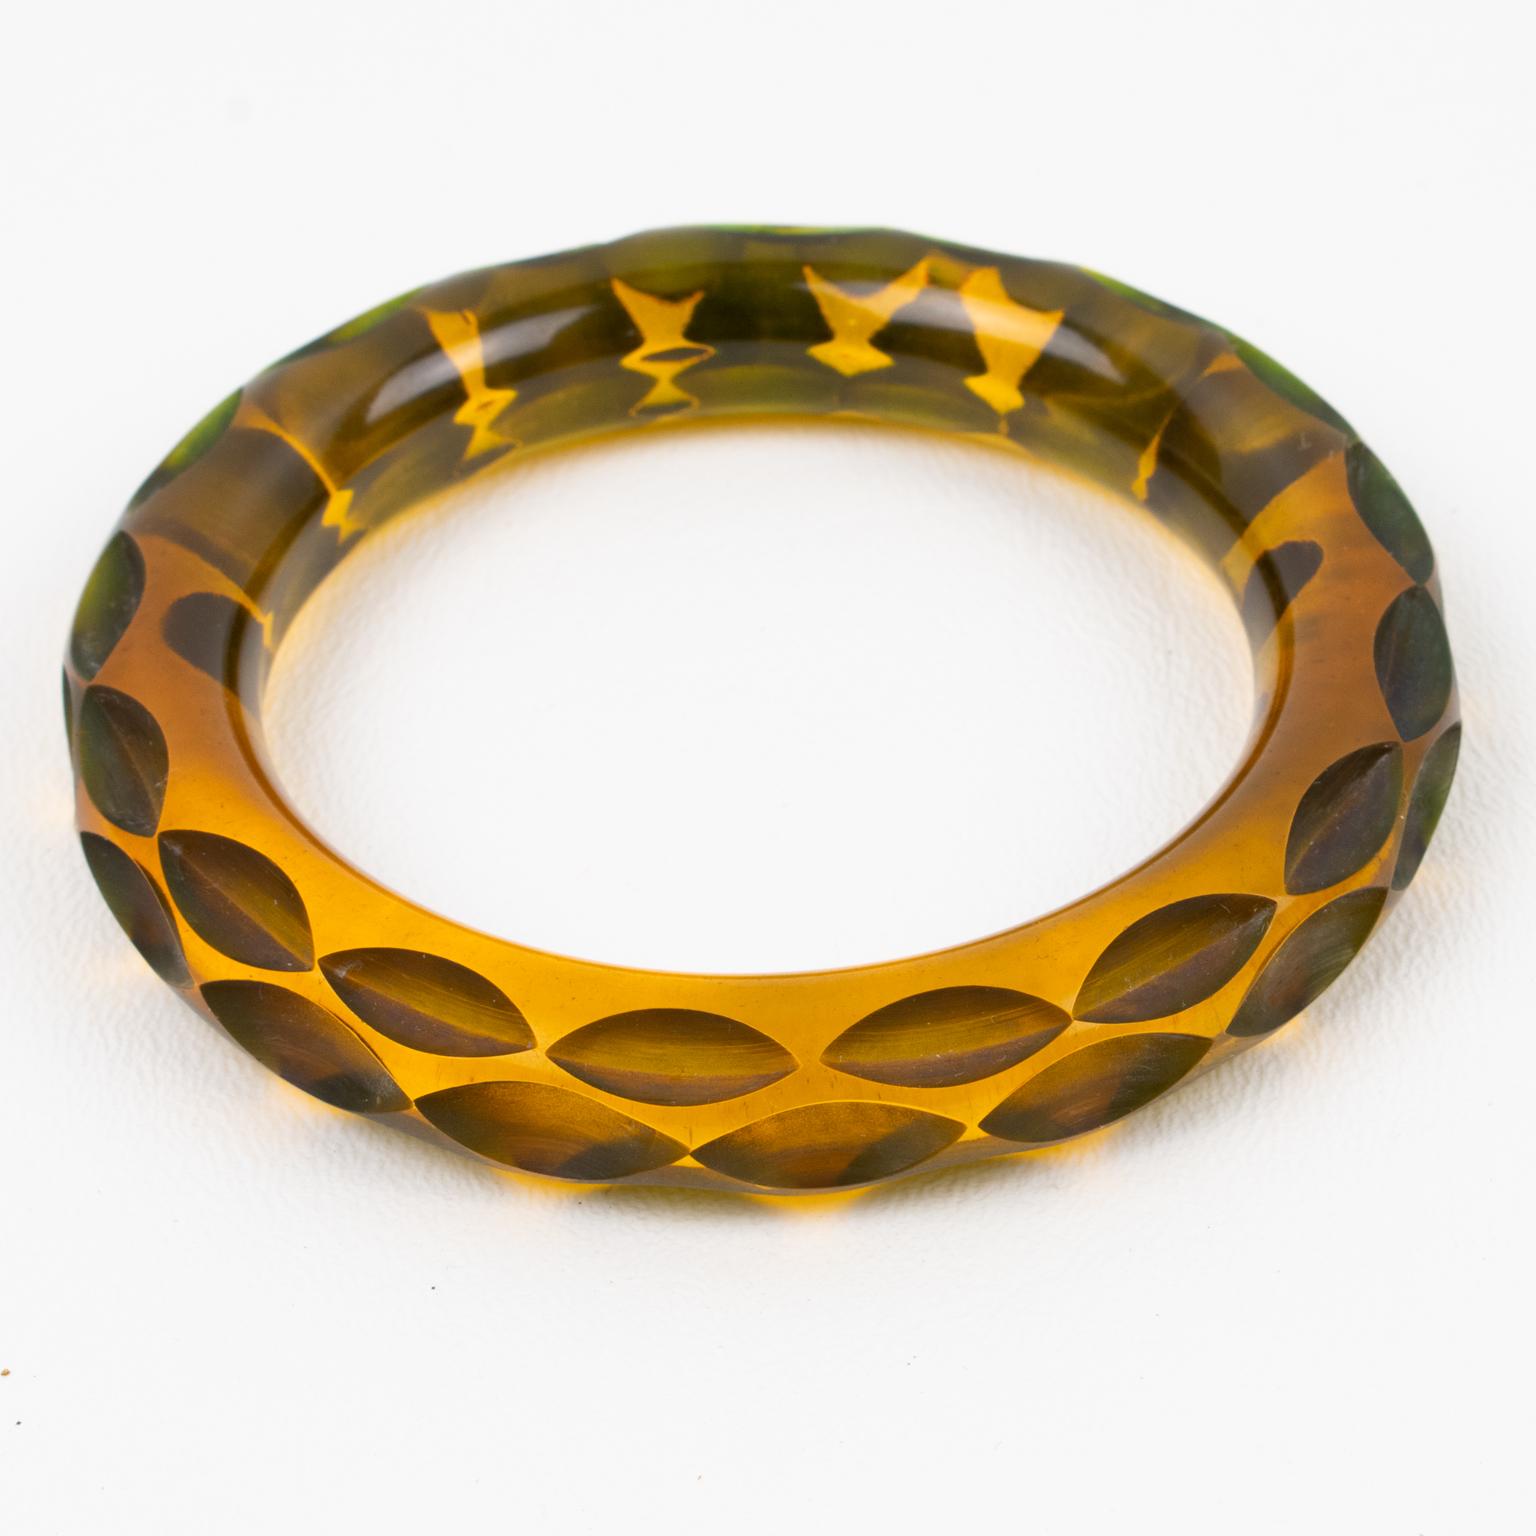 This stunning transparent amber-color Bakelite bracelet bangle has a chunky domed shape with a deeply carved design. The piece boasts an intense orange-amber tone, all transparent with a green overtone on the edges. This Prystal quality piece has